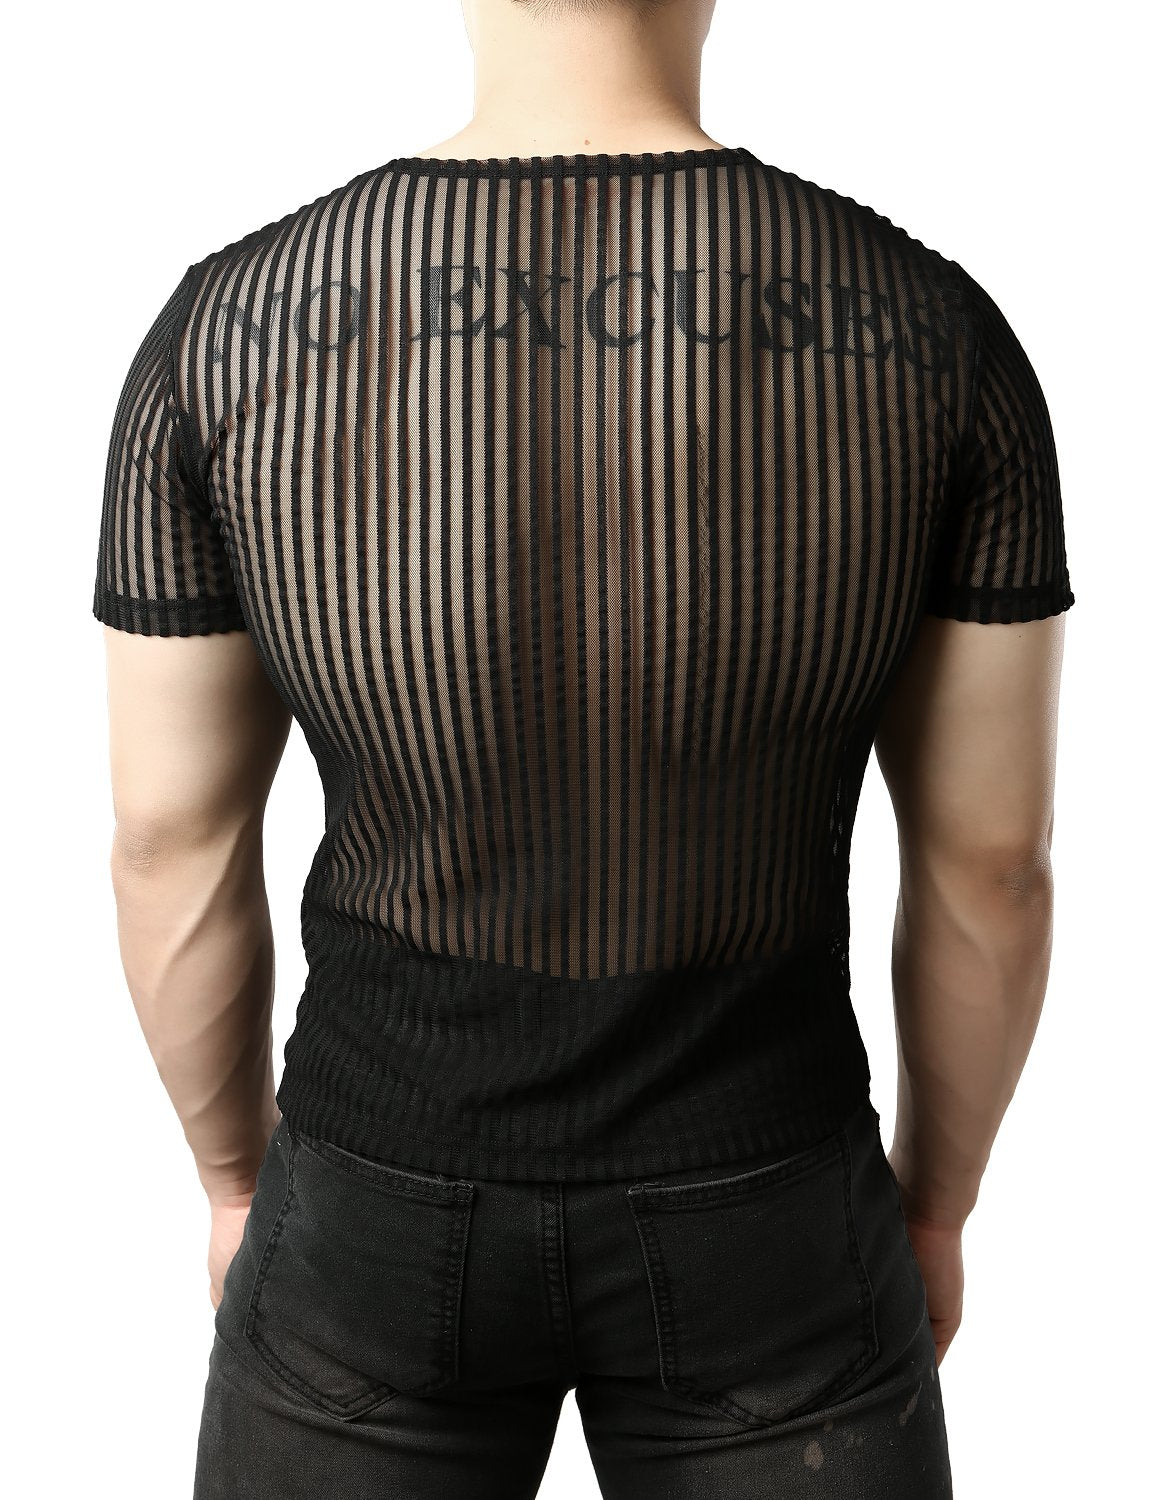 JOGAL Men's Vertical Striped See Through Fitted Short Sleeve Muscle Top